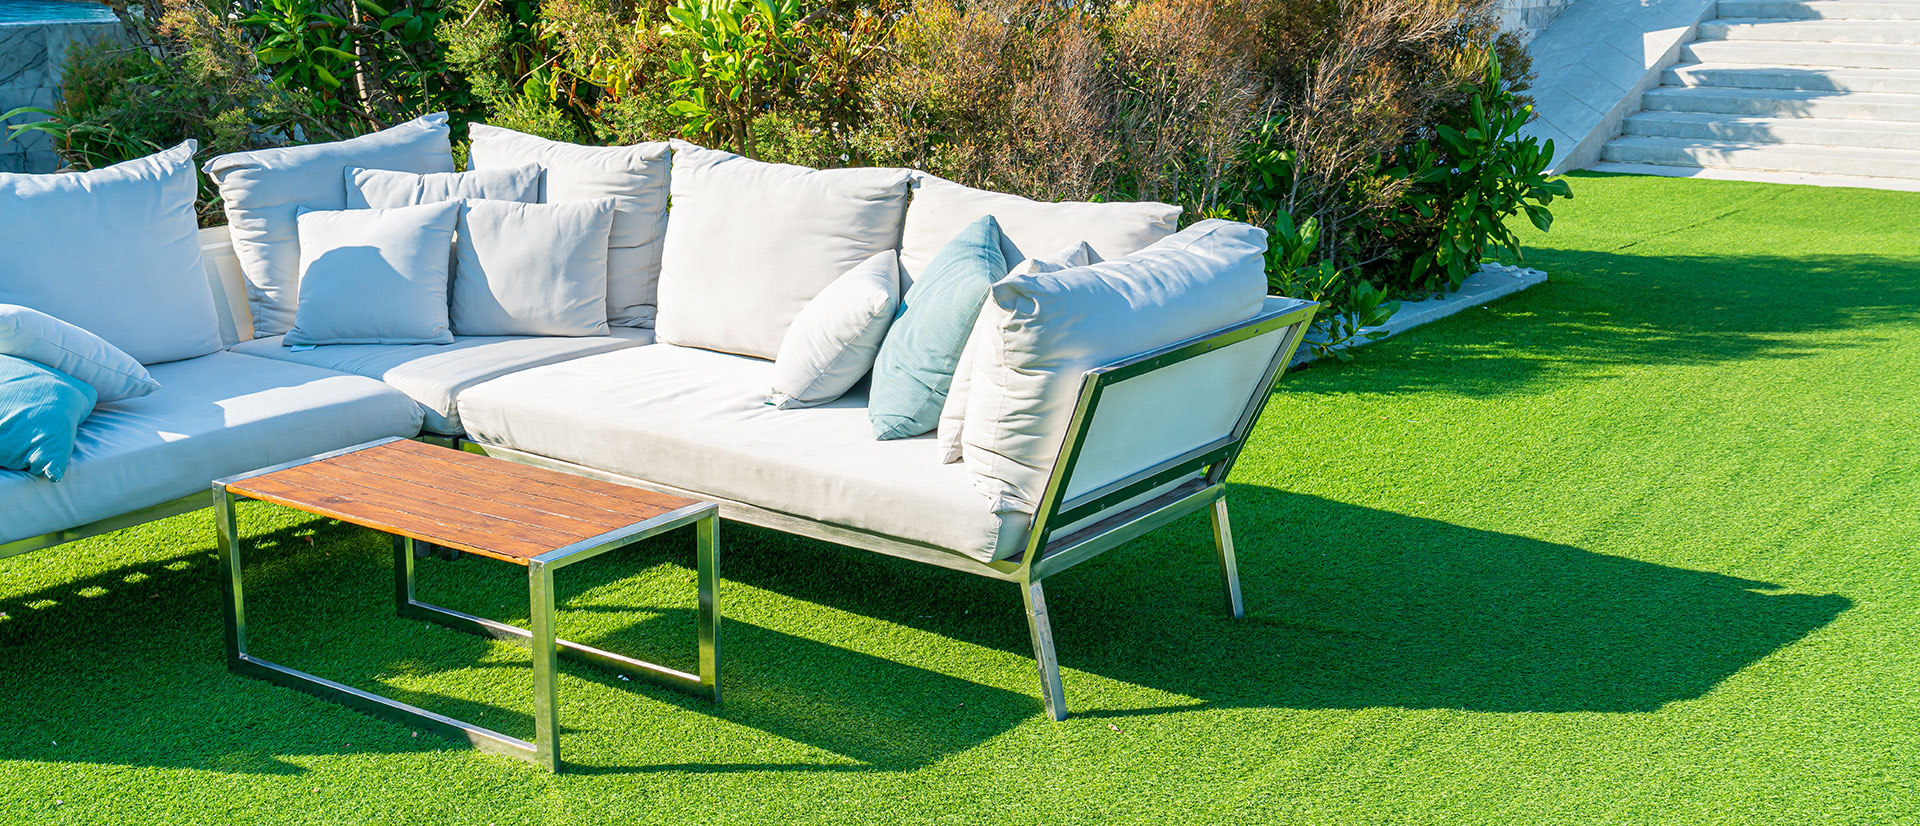 The Green Revolution: Embracing the Benefits of Artificial Grass